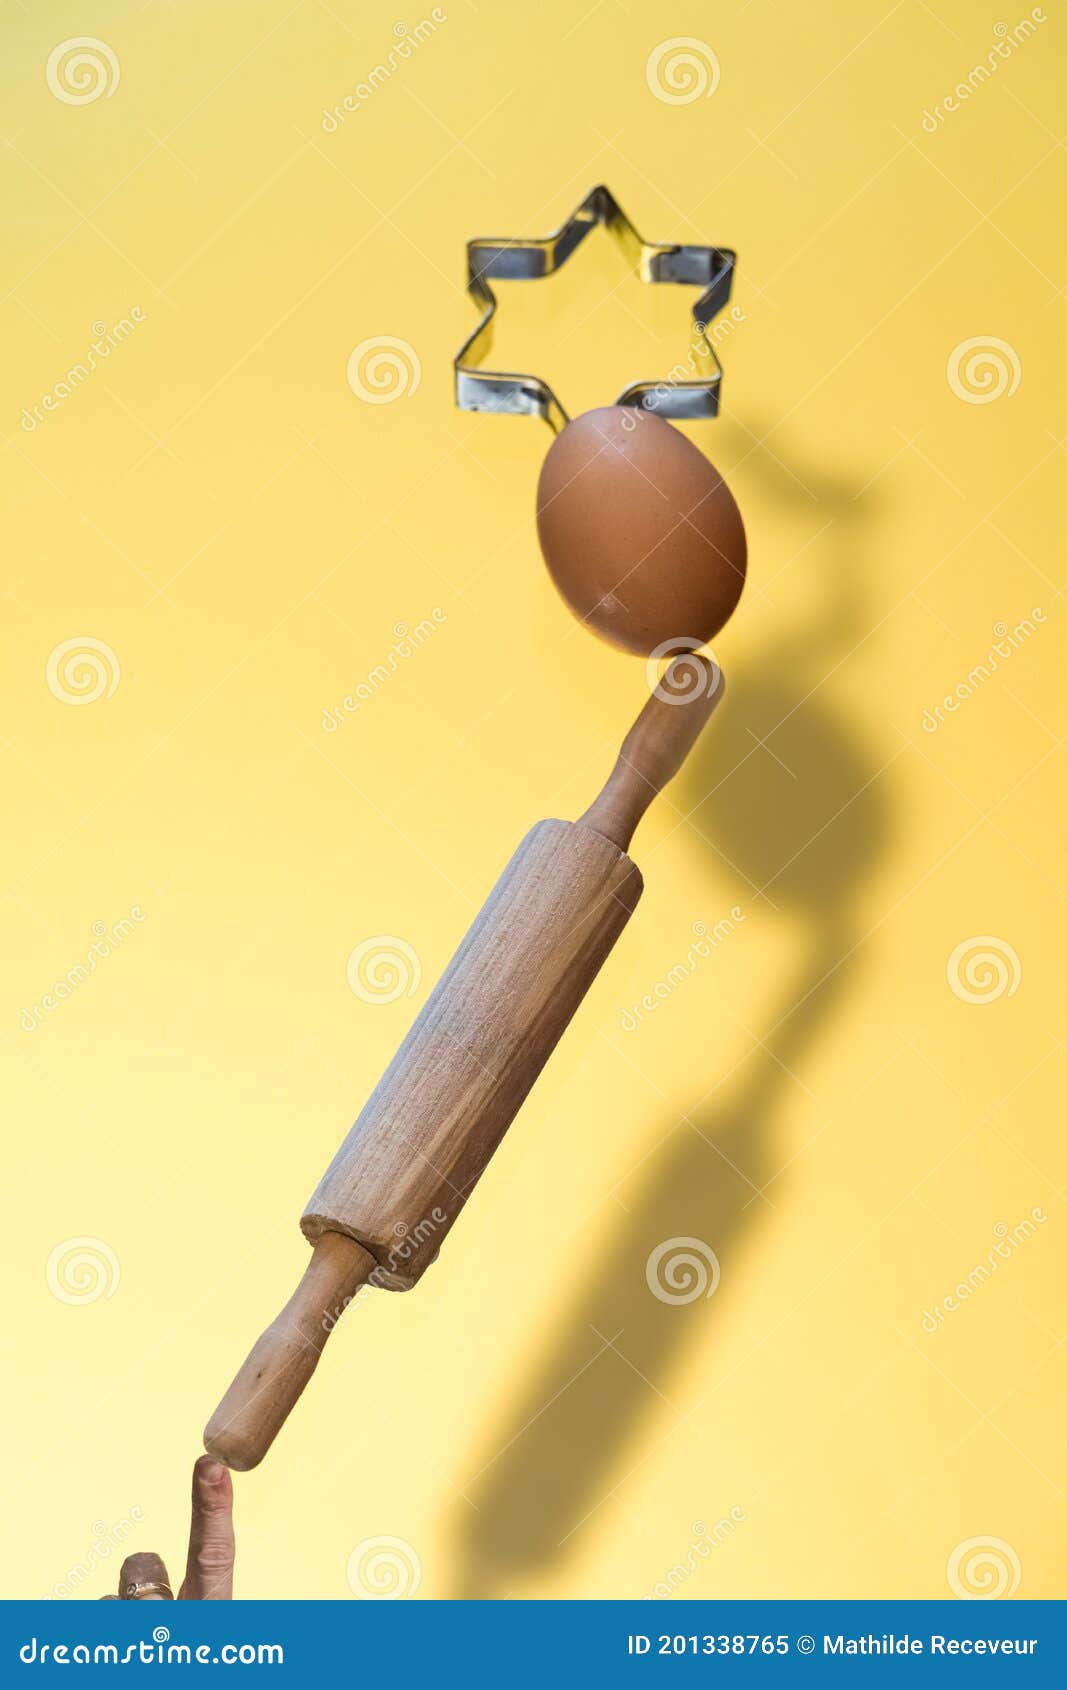 Bakery Levitation with Rolling Pin, Egg and Star Shaped Cake Pan